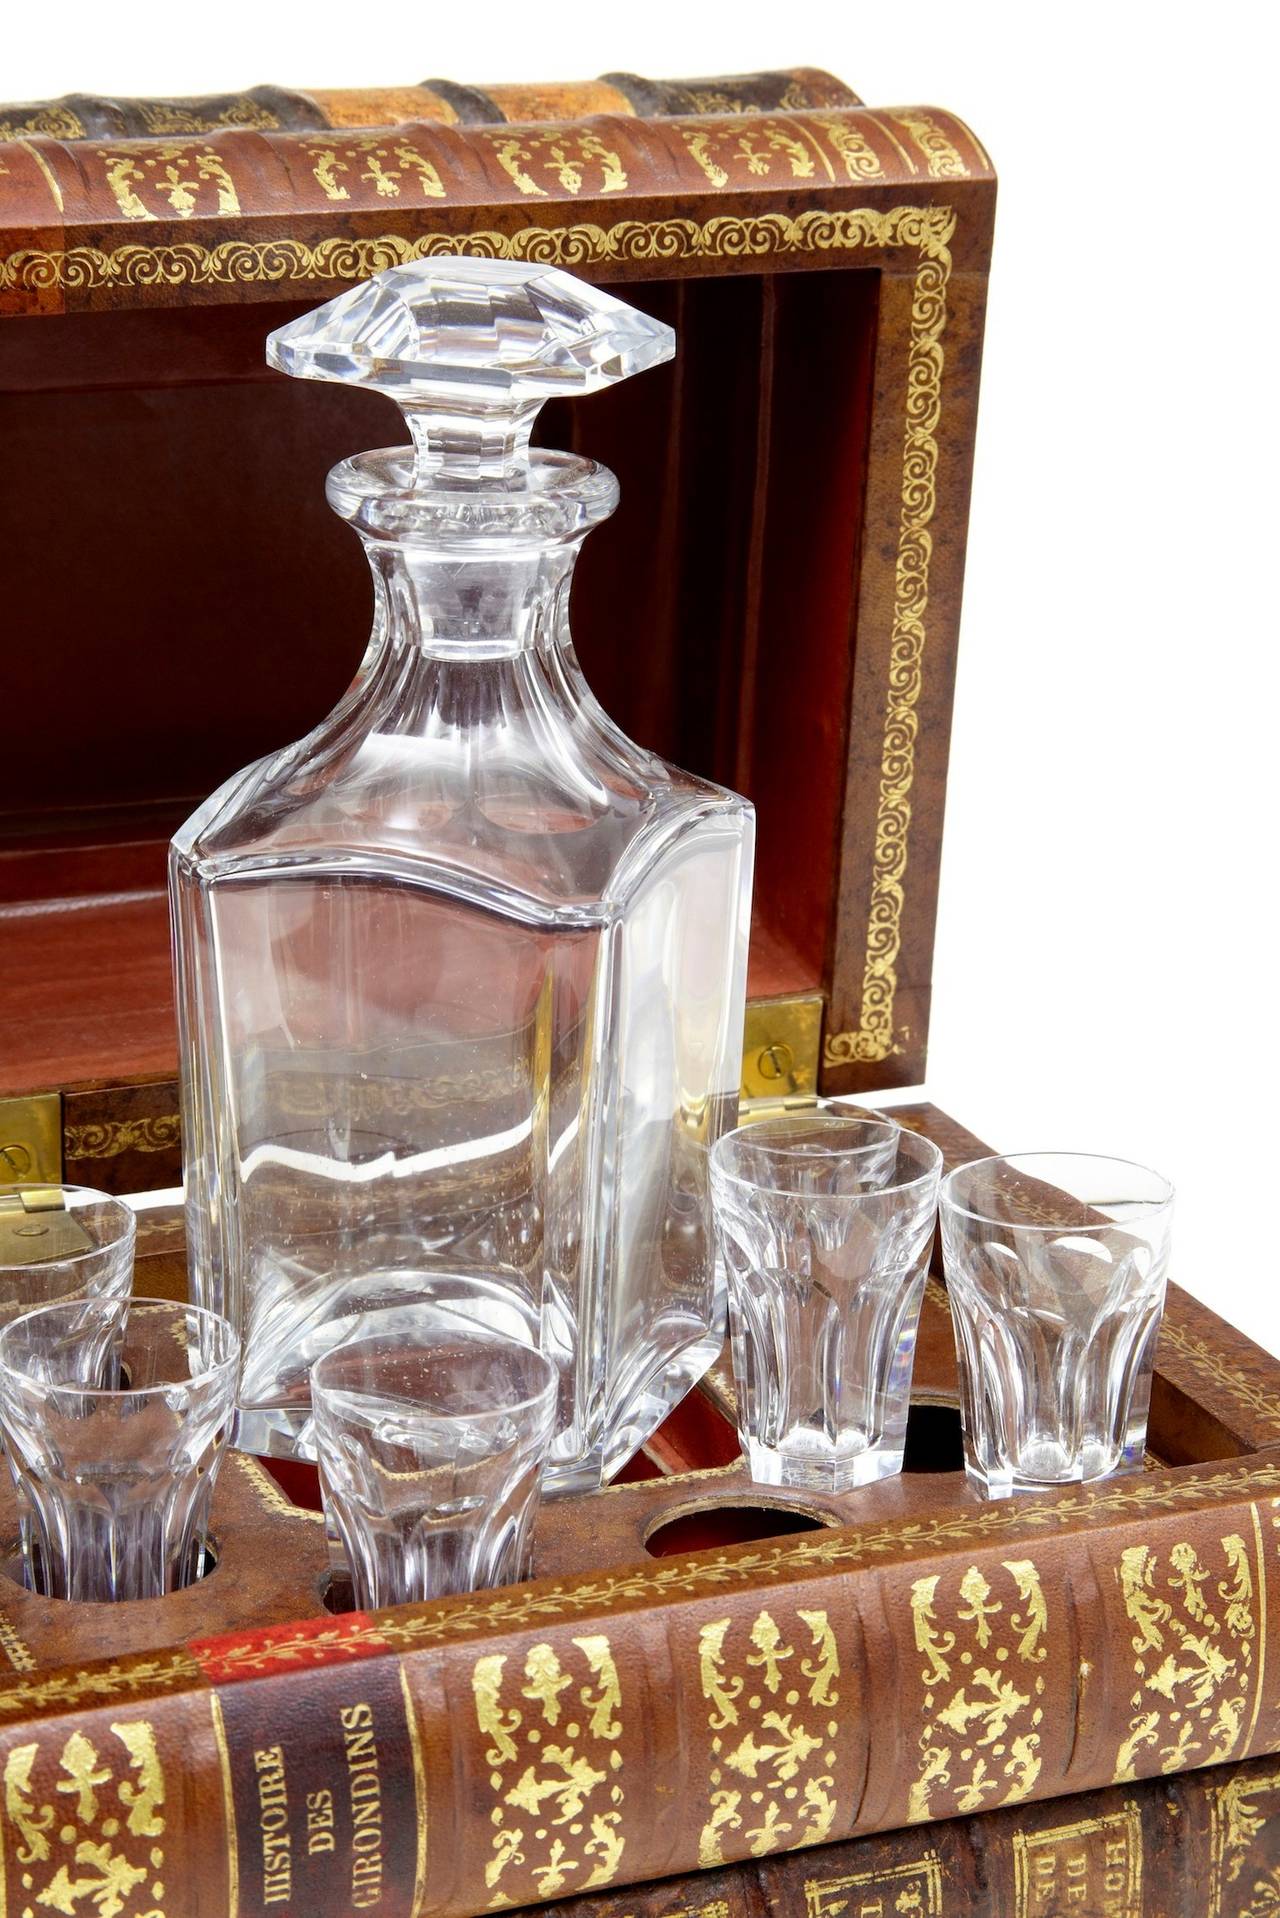 Woodwork Baccarat Novelty Decanter Set in Faux Leather-Form Case